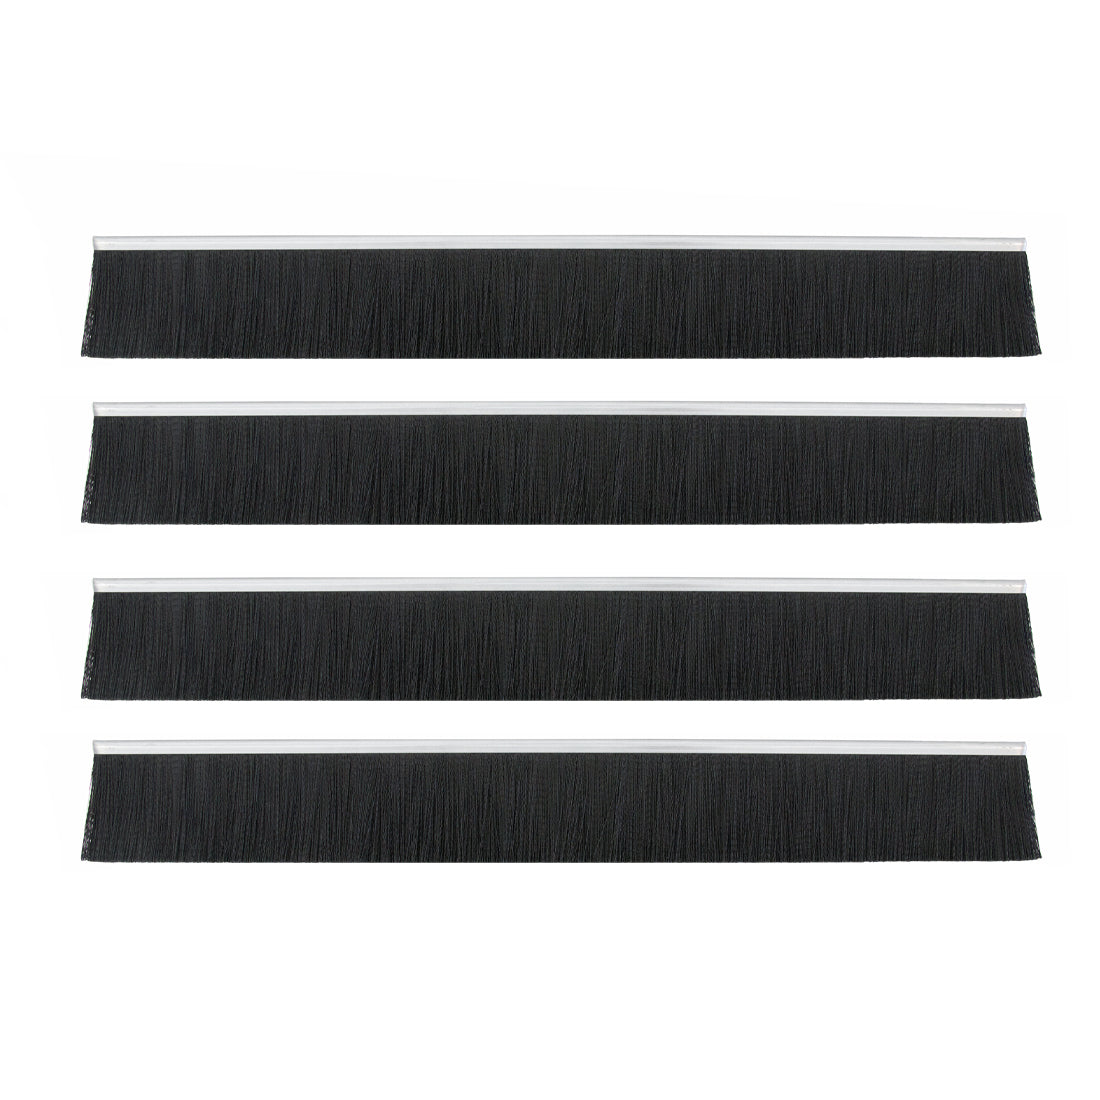 Screen Cleaner Replacement Brush Set - 4 Brush Front View